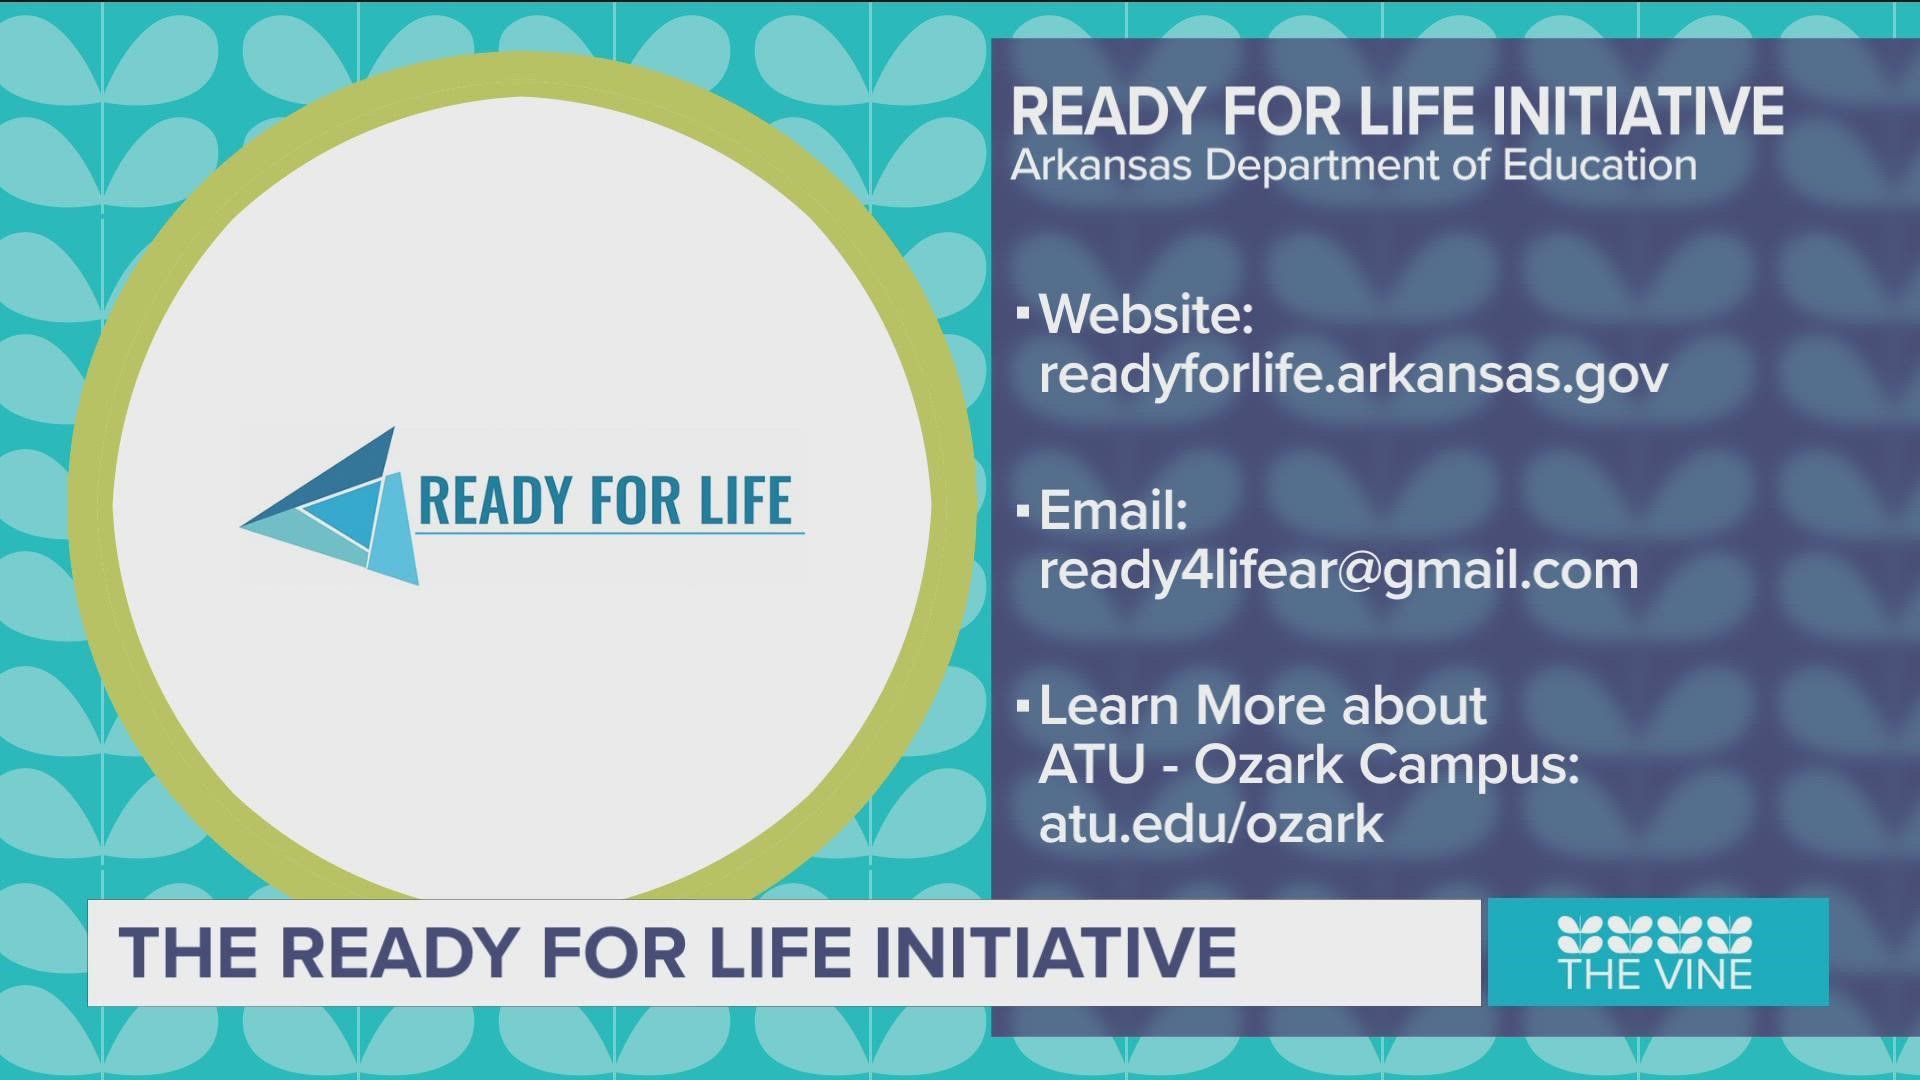 SEGMENT PAID FOR BY: Arkansas Department of Education. ADE’s program Ready for Life is providing every Arkansan with personalized career tools.